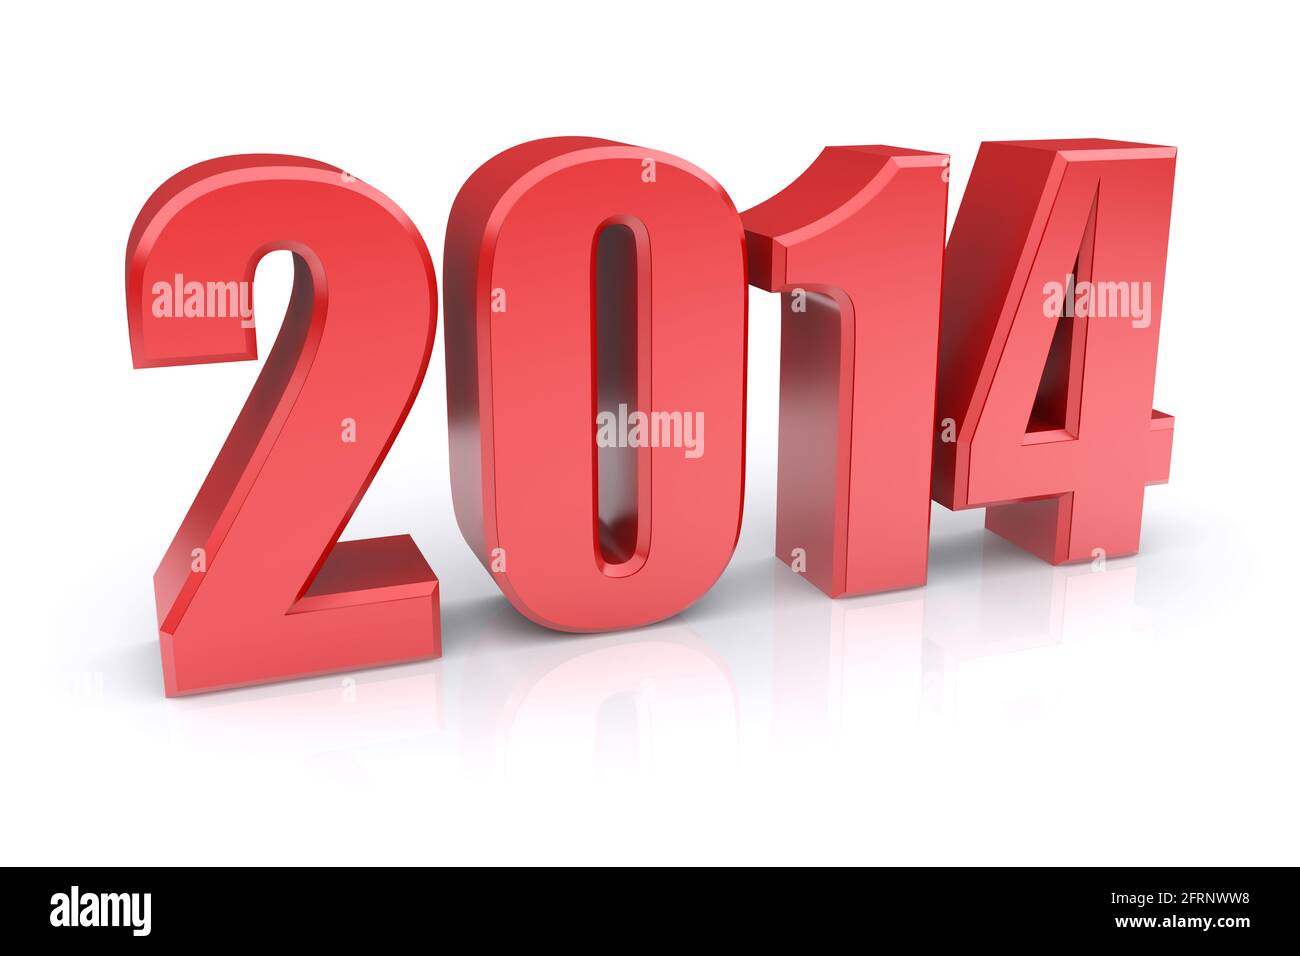 Red 2014 year on a white background. 3d rendered image Stock Photo